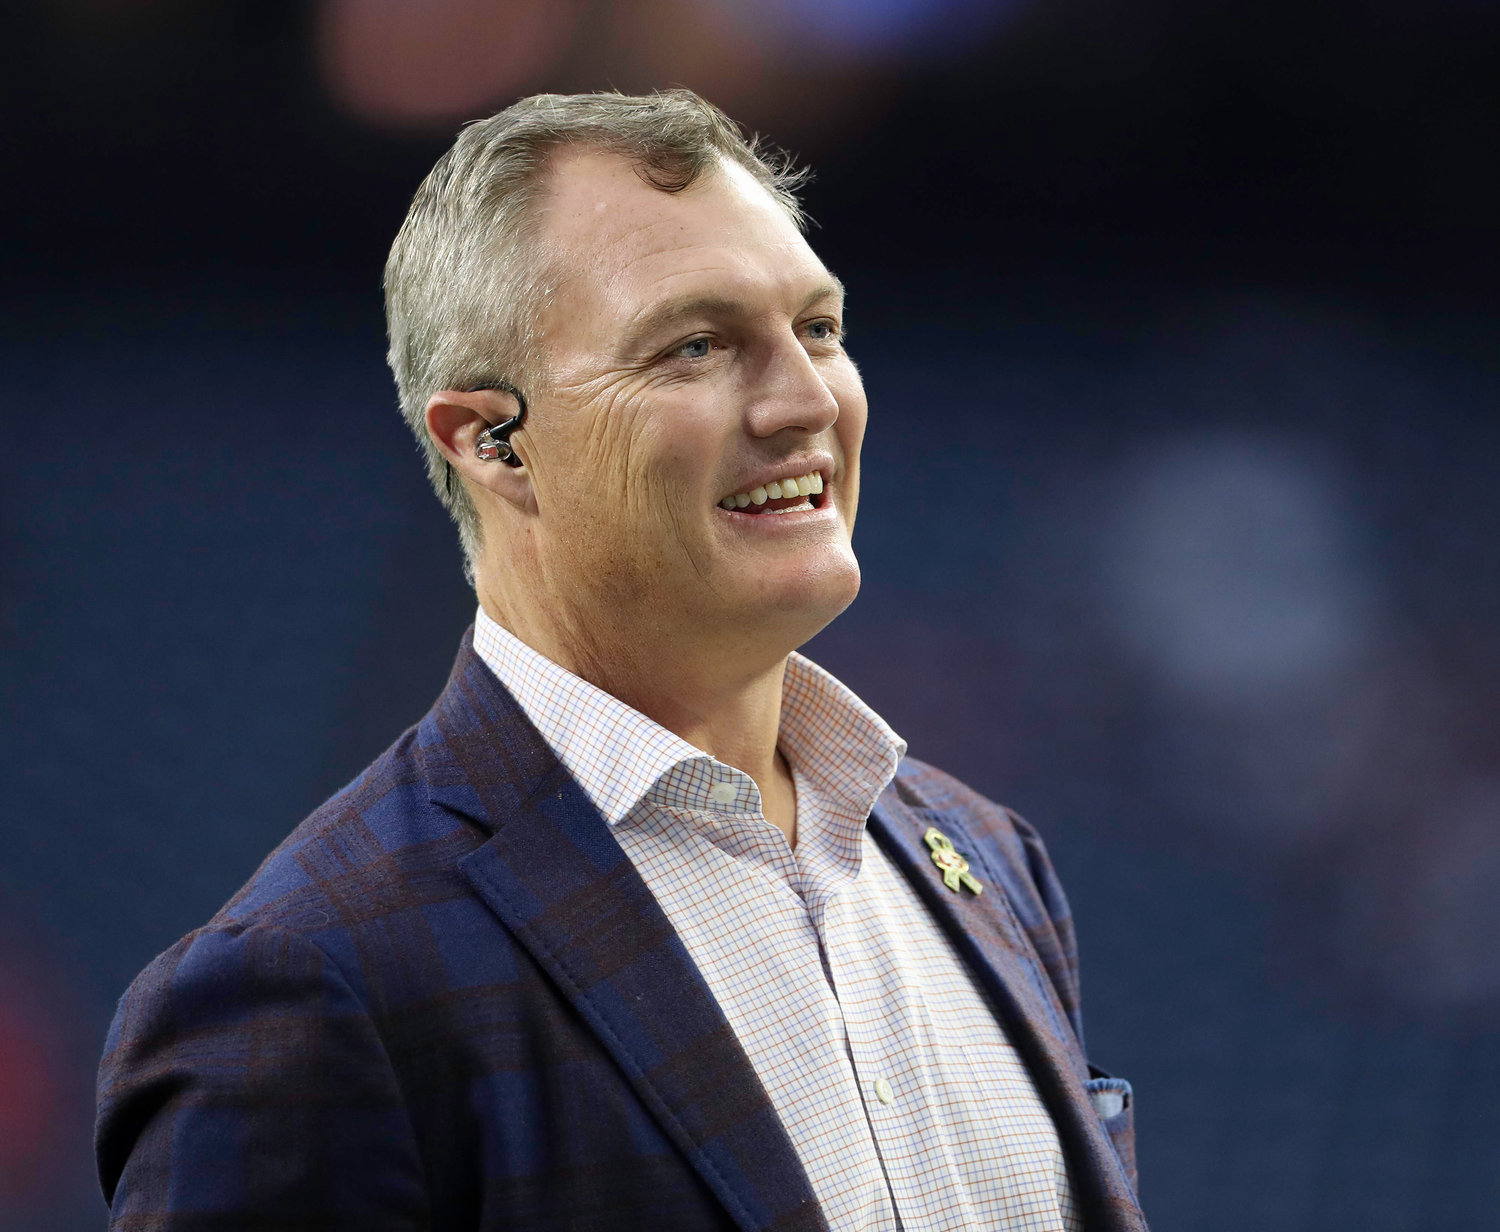 San Francisco 49ers General Manager John Lynch before the start of an NFL preseason game between the Texans and the 49ers in Houston, Texas, on August 25, 2022.